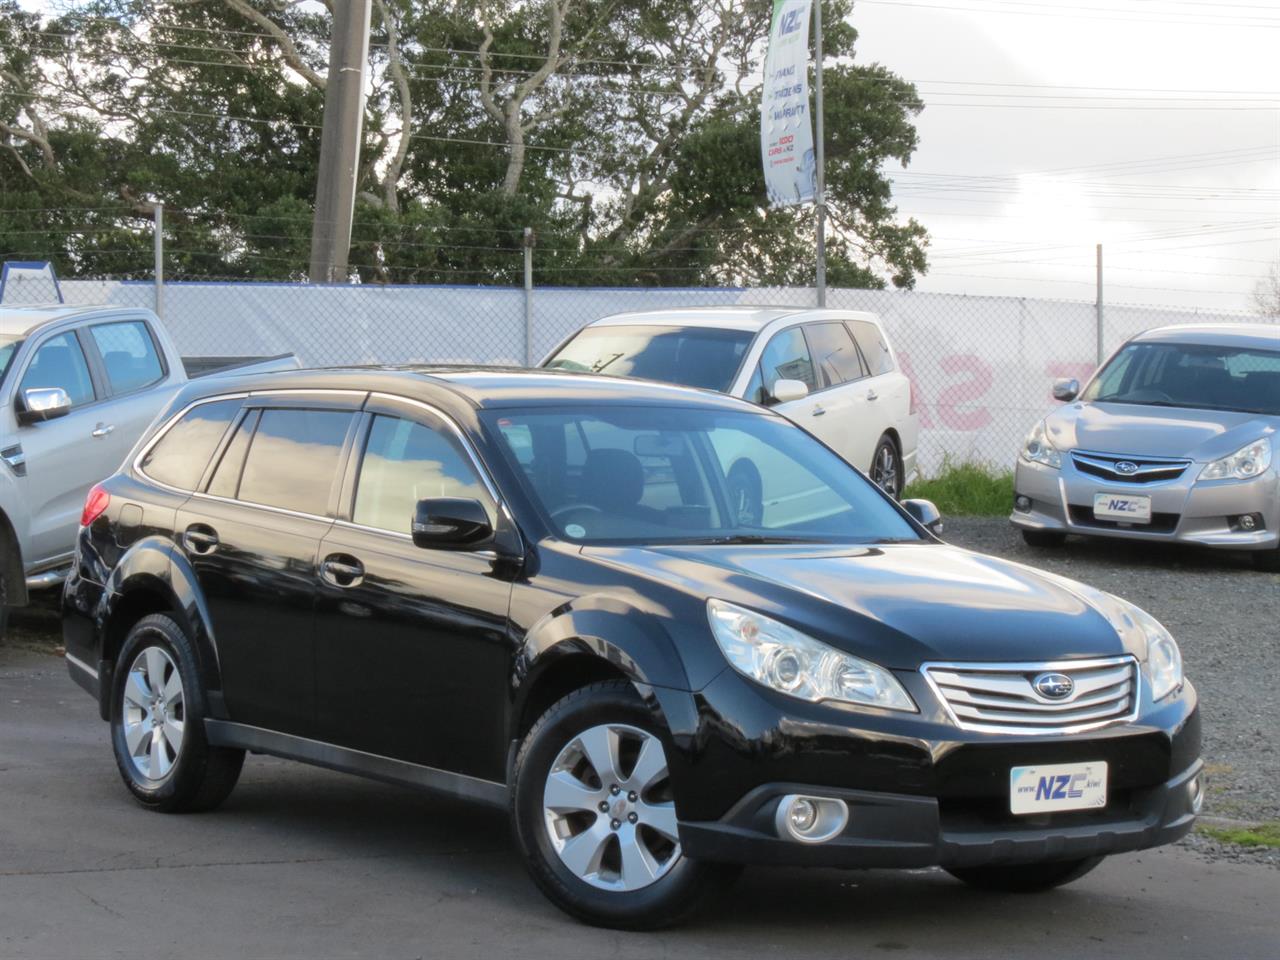 NZC best hot price for 2009 Subaru Outback in Auckland